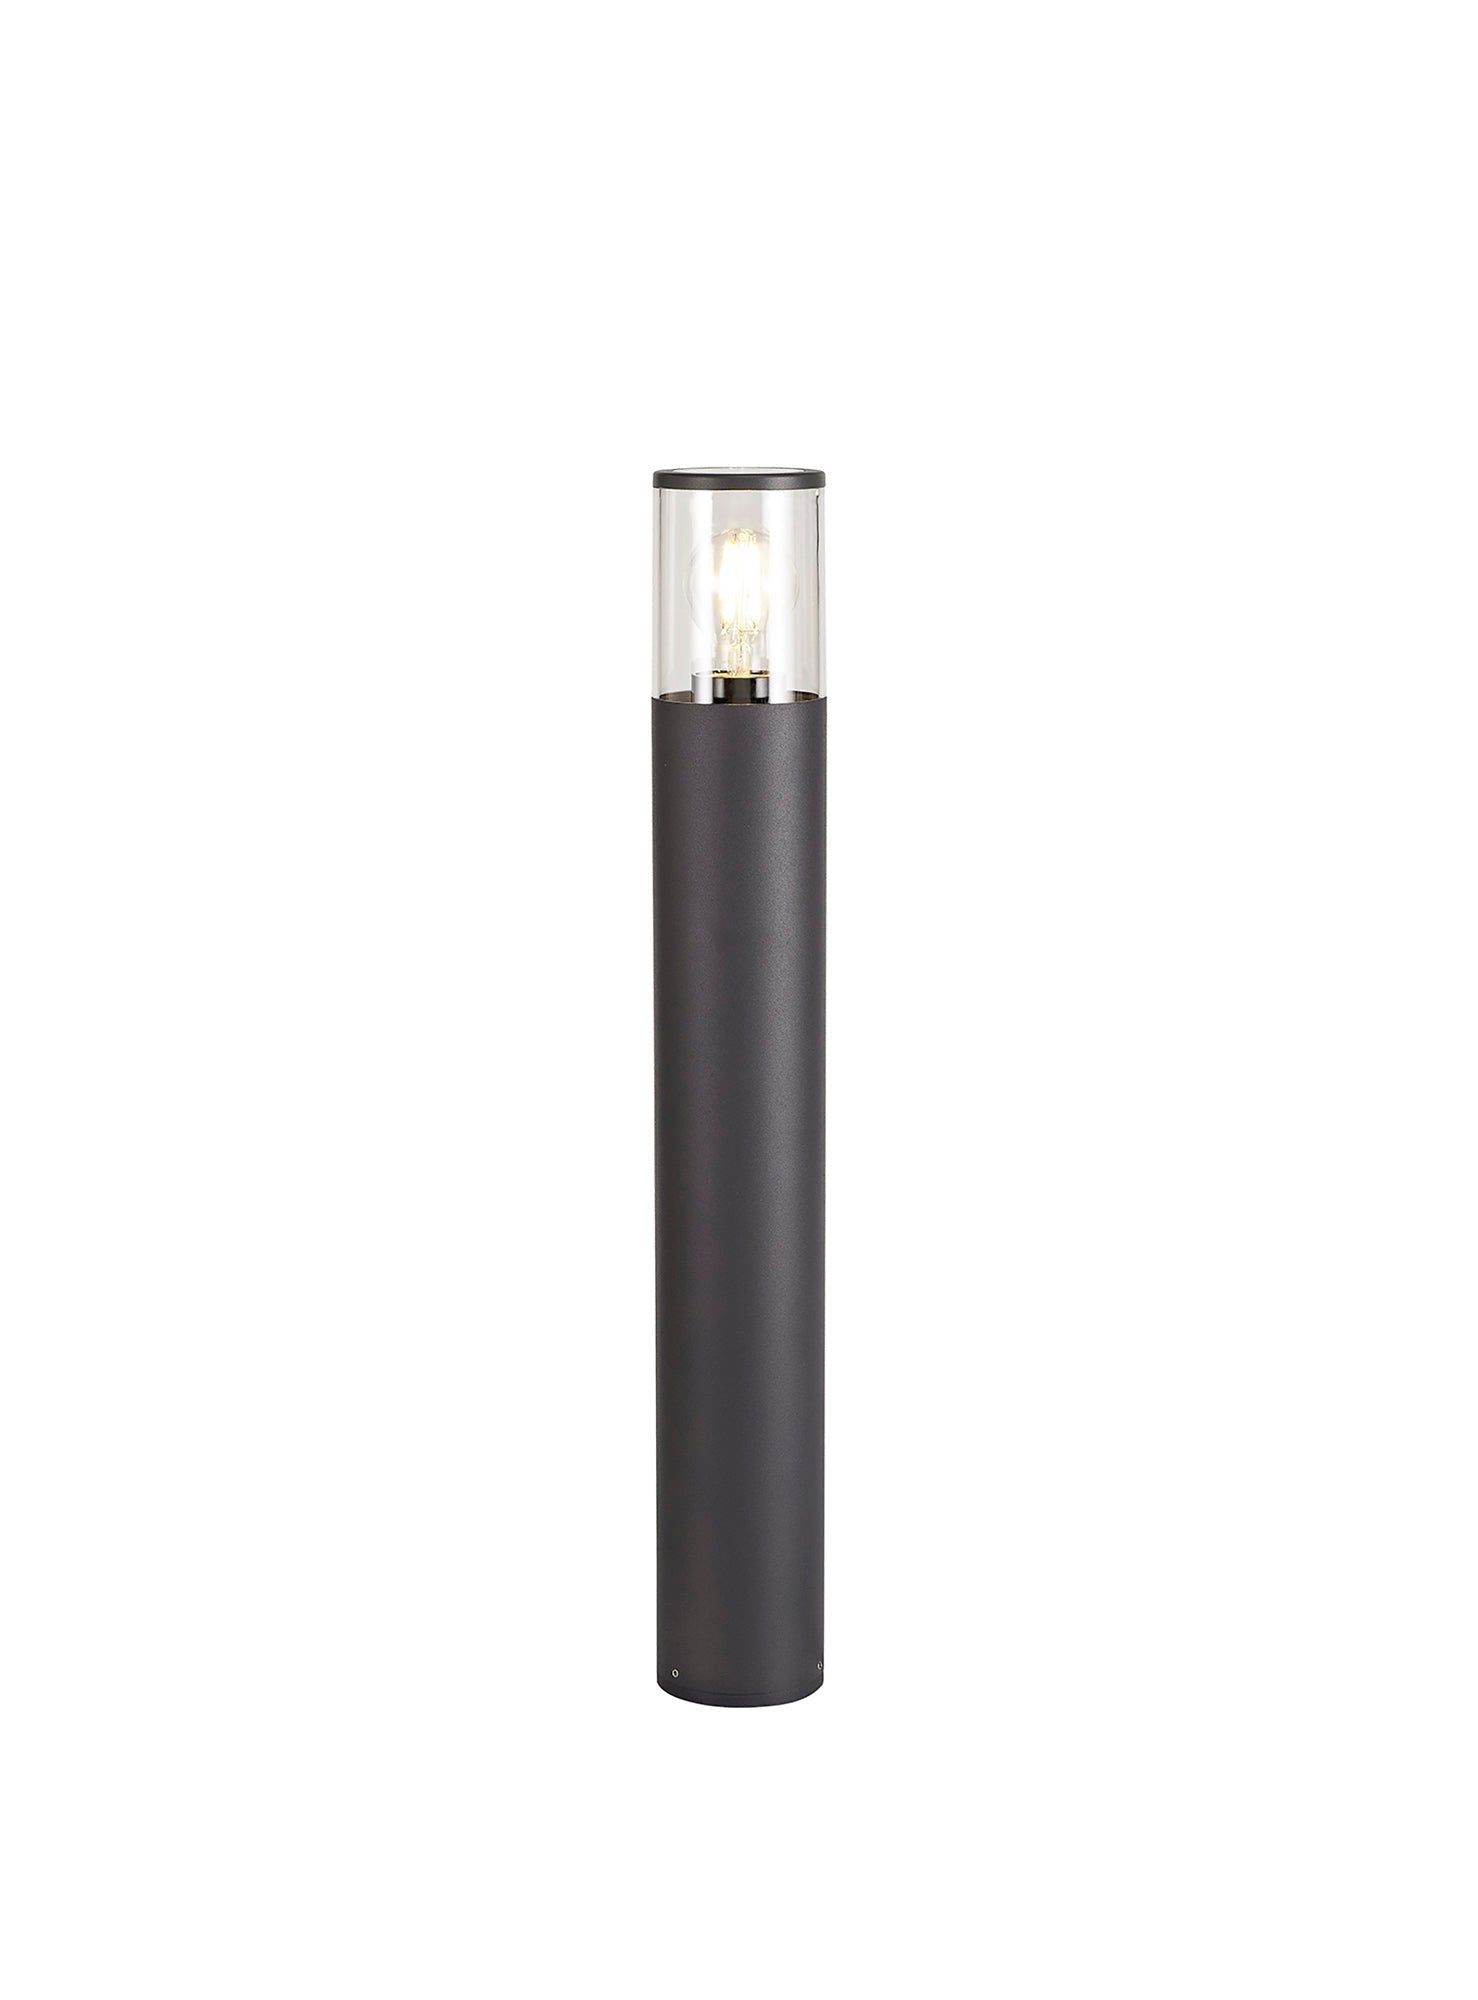 Taiminer 45cm Post Lamp 1 x E27, IP54, Anthracite/Opal/Smoked/Clear,  2yrs Warranty